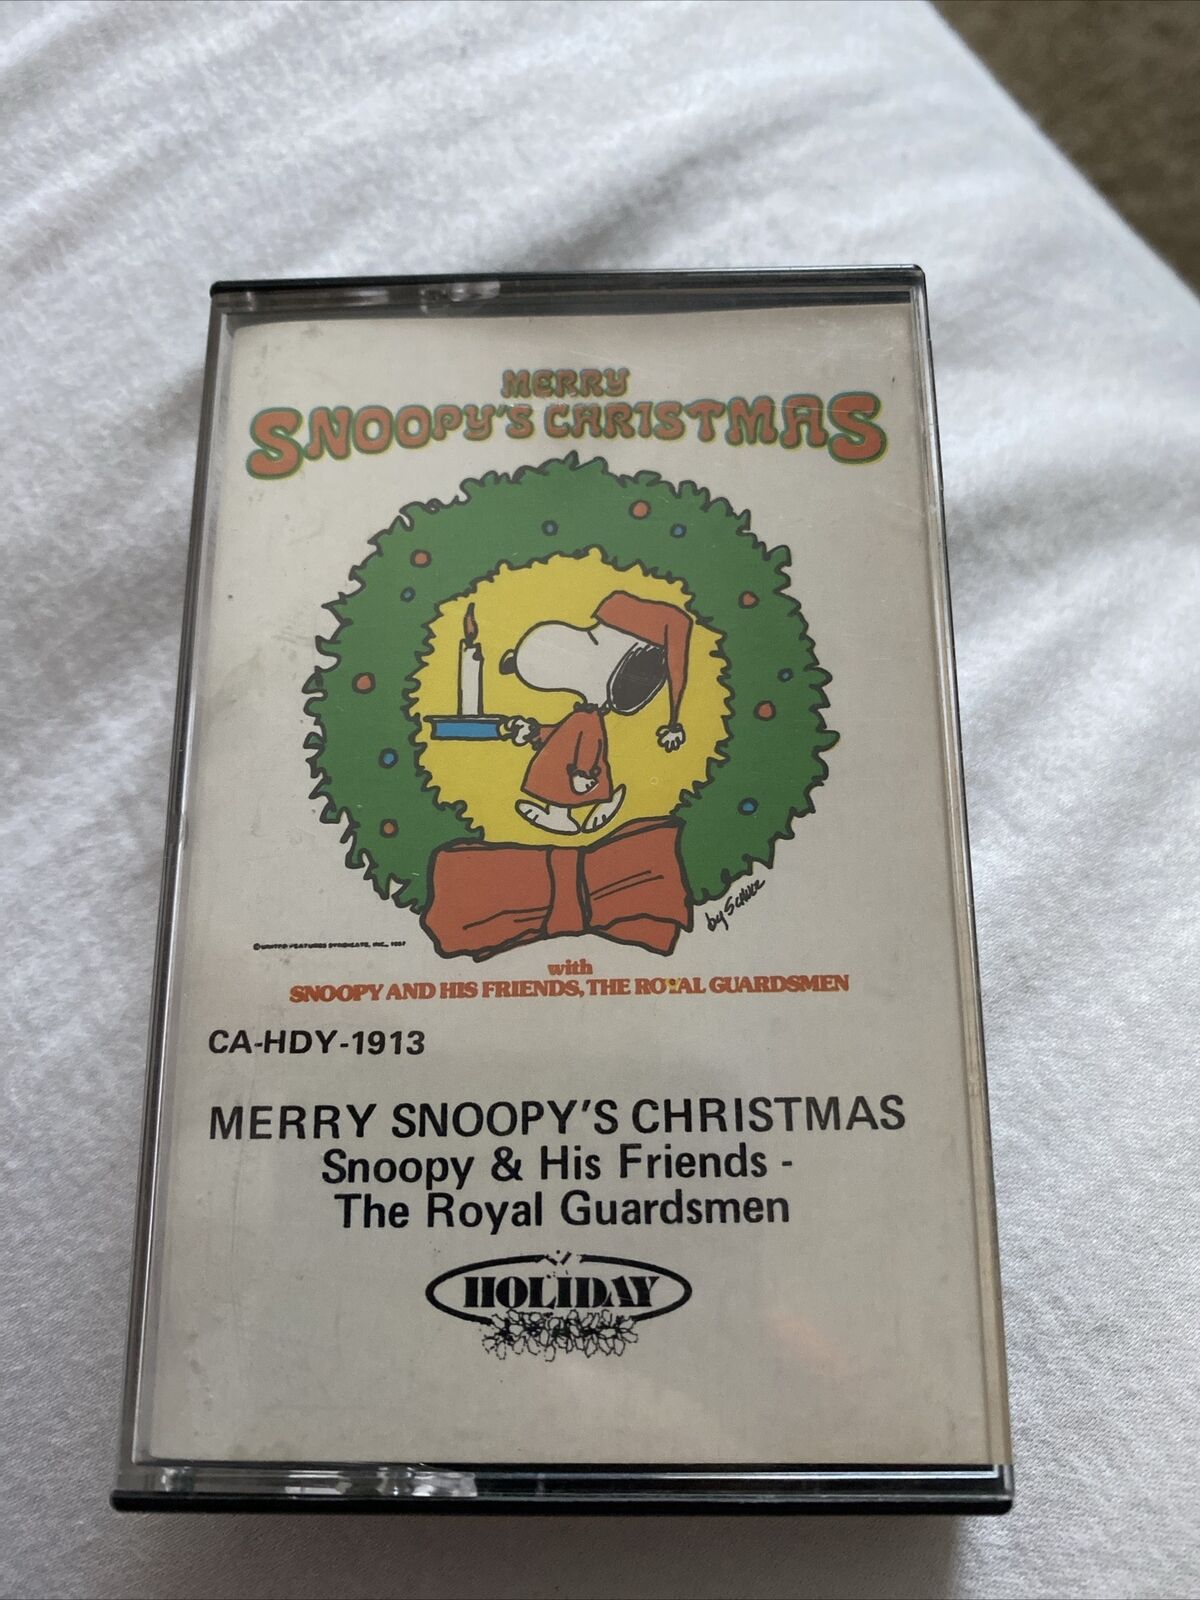 Merry Snoopy’s Christmas Snoopy & His Friends Royal Guardsmen Cassette Tape 1980